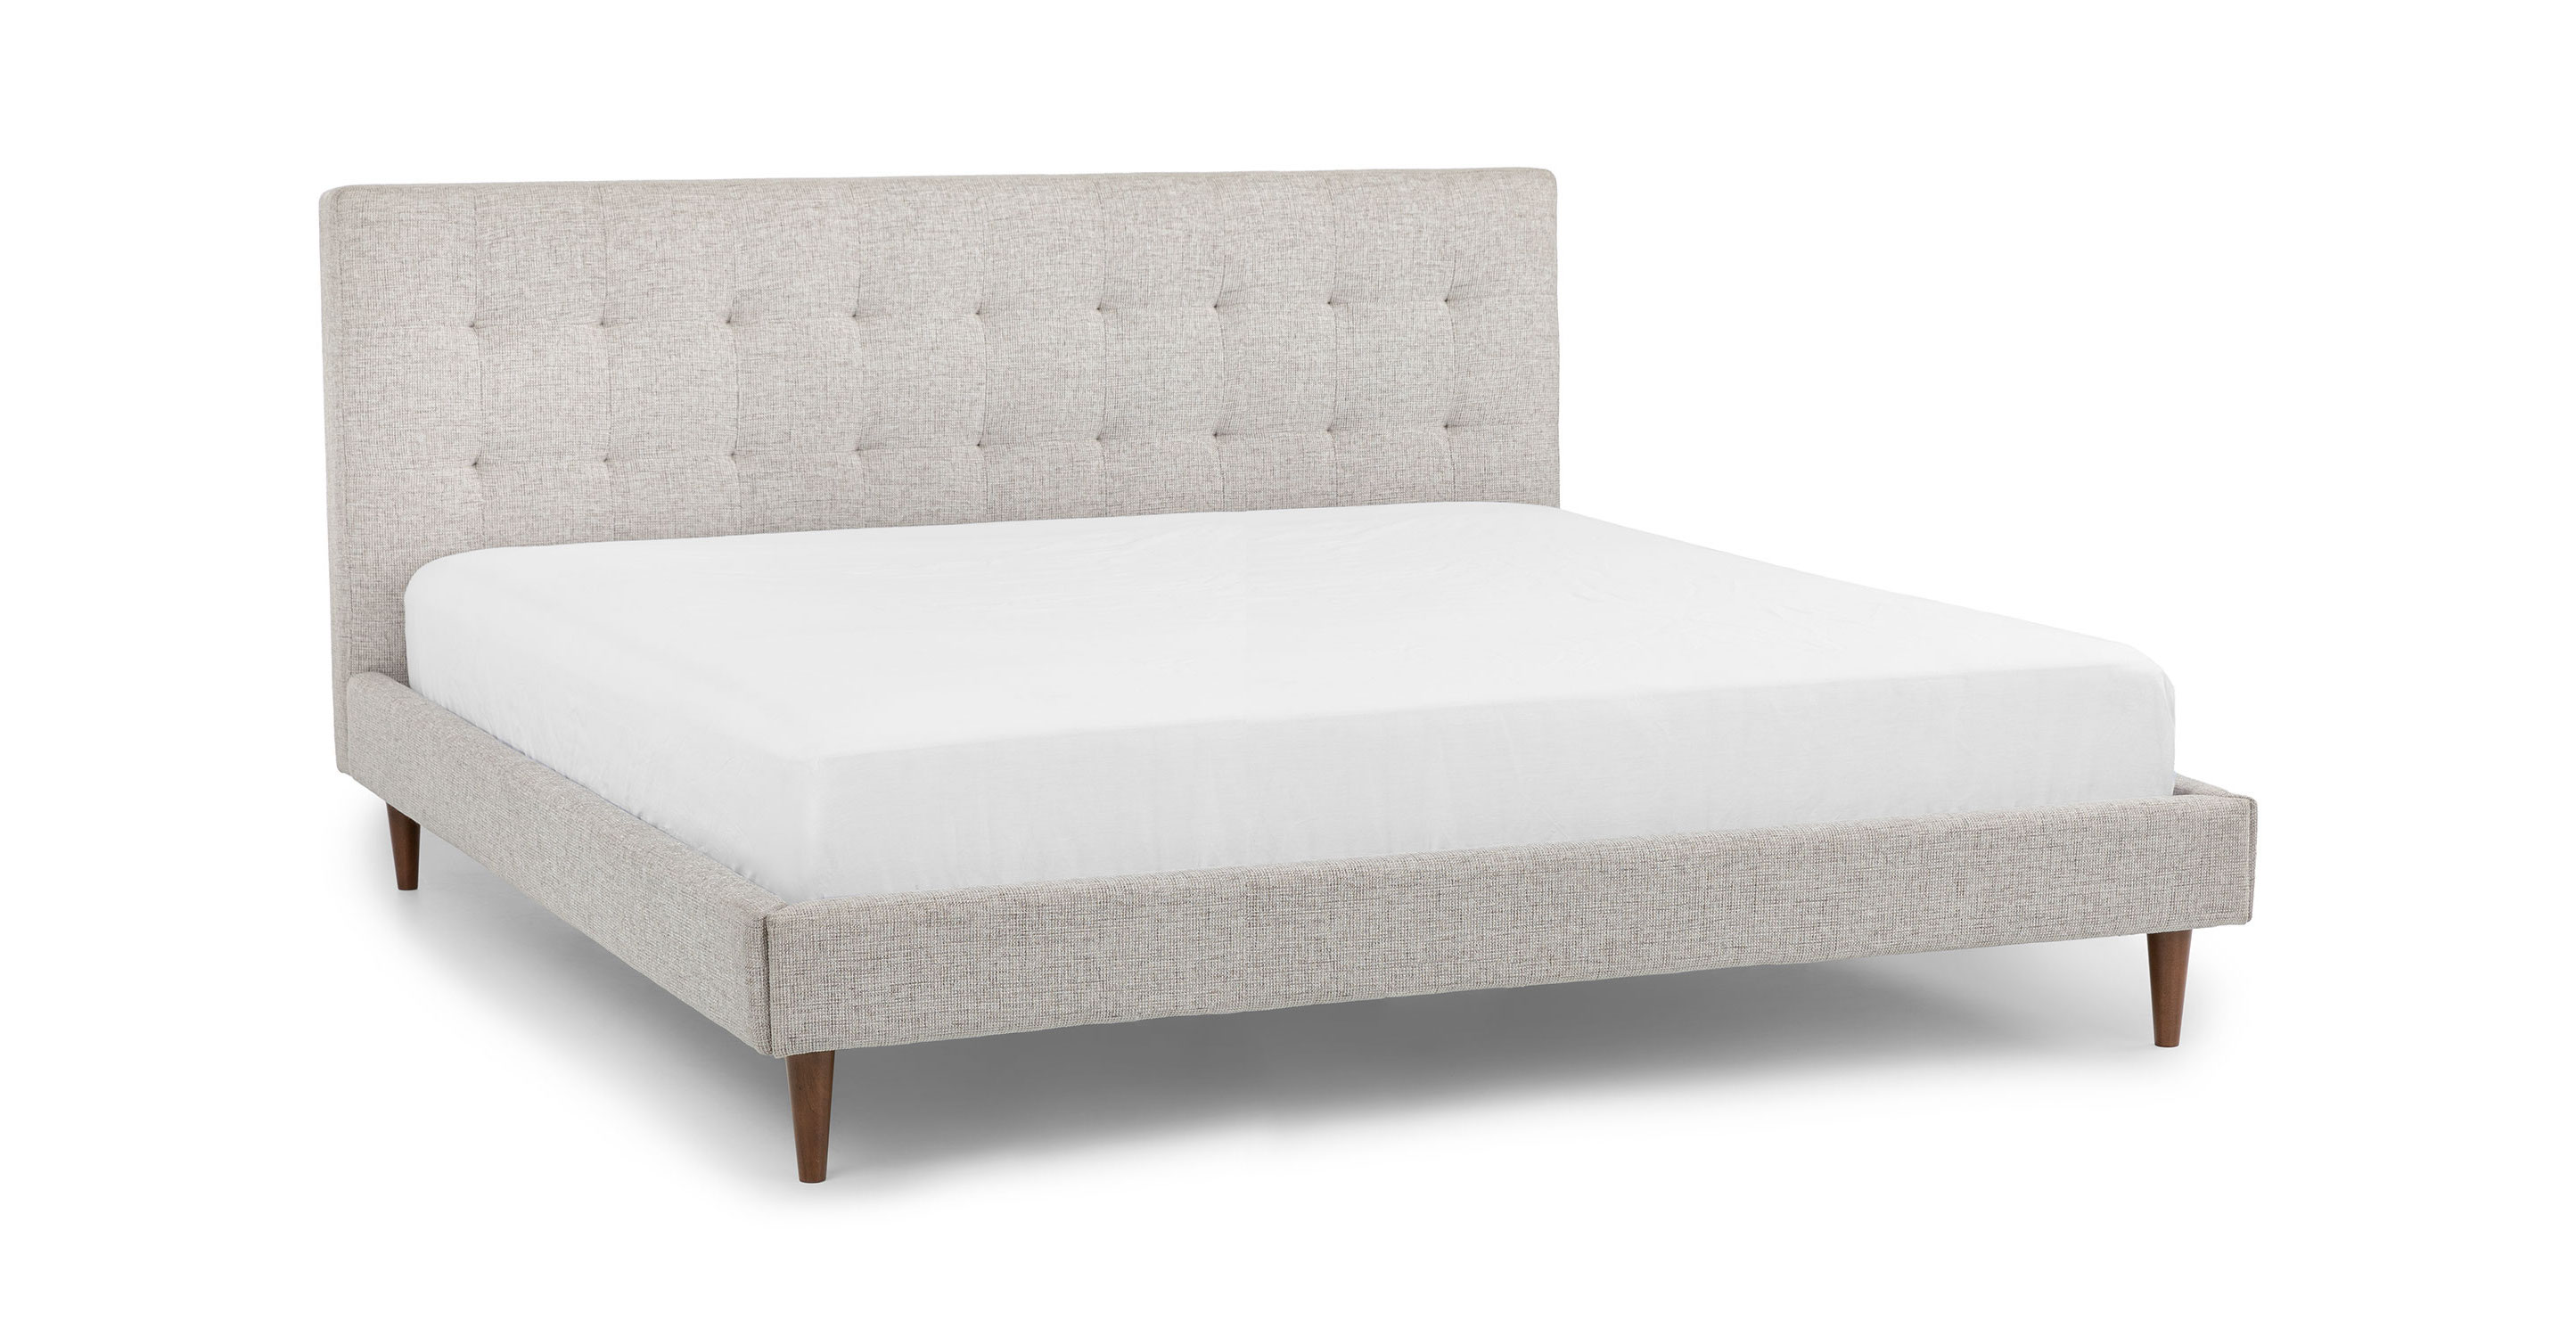 Contemporary, Mid Century & Modern Beds + Bedframes   Article